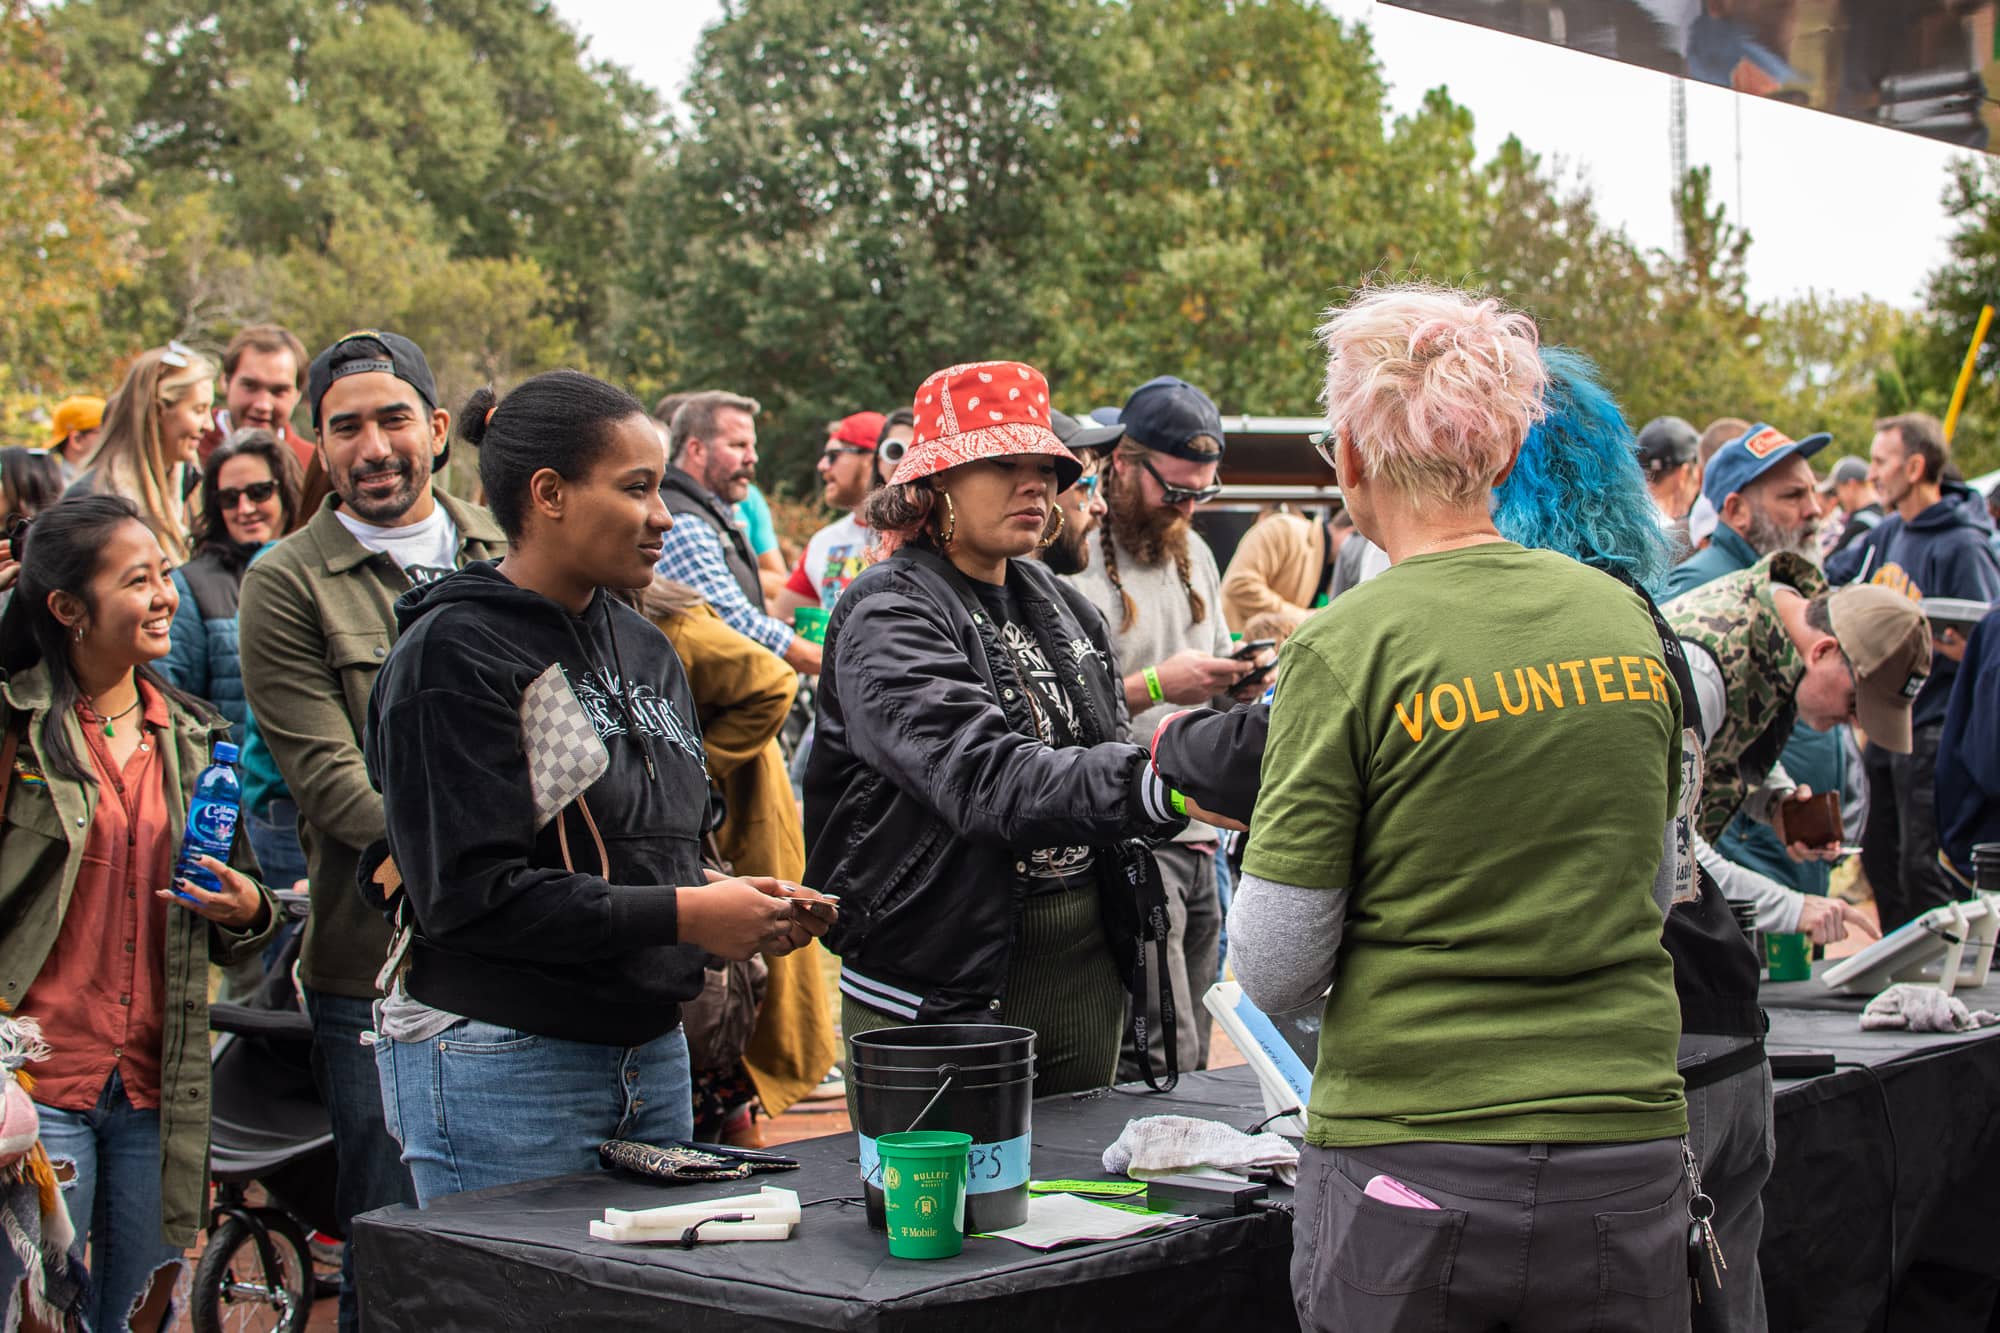 Candid image of a person wearing a volunteer t-shirt serving a long line of customers at an event.